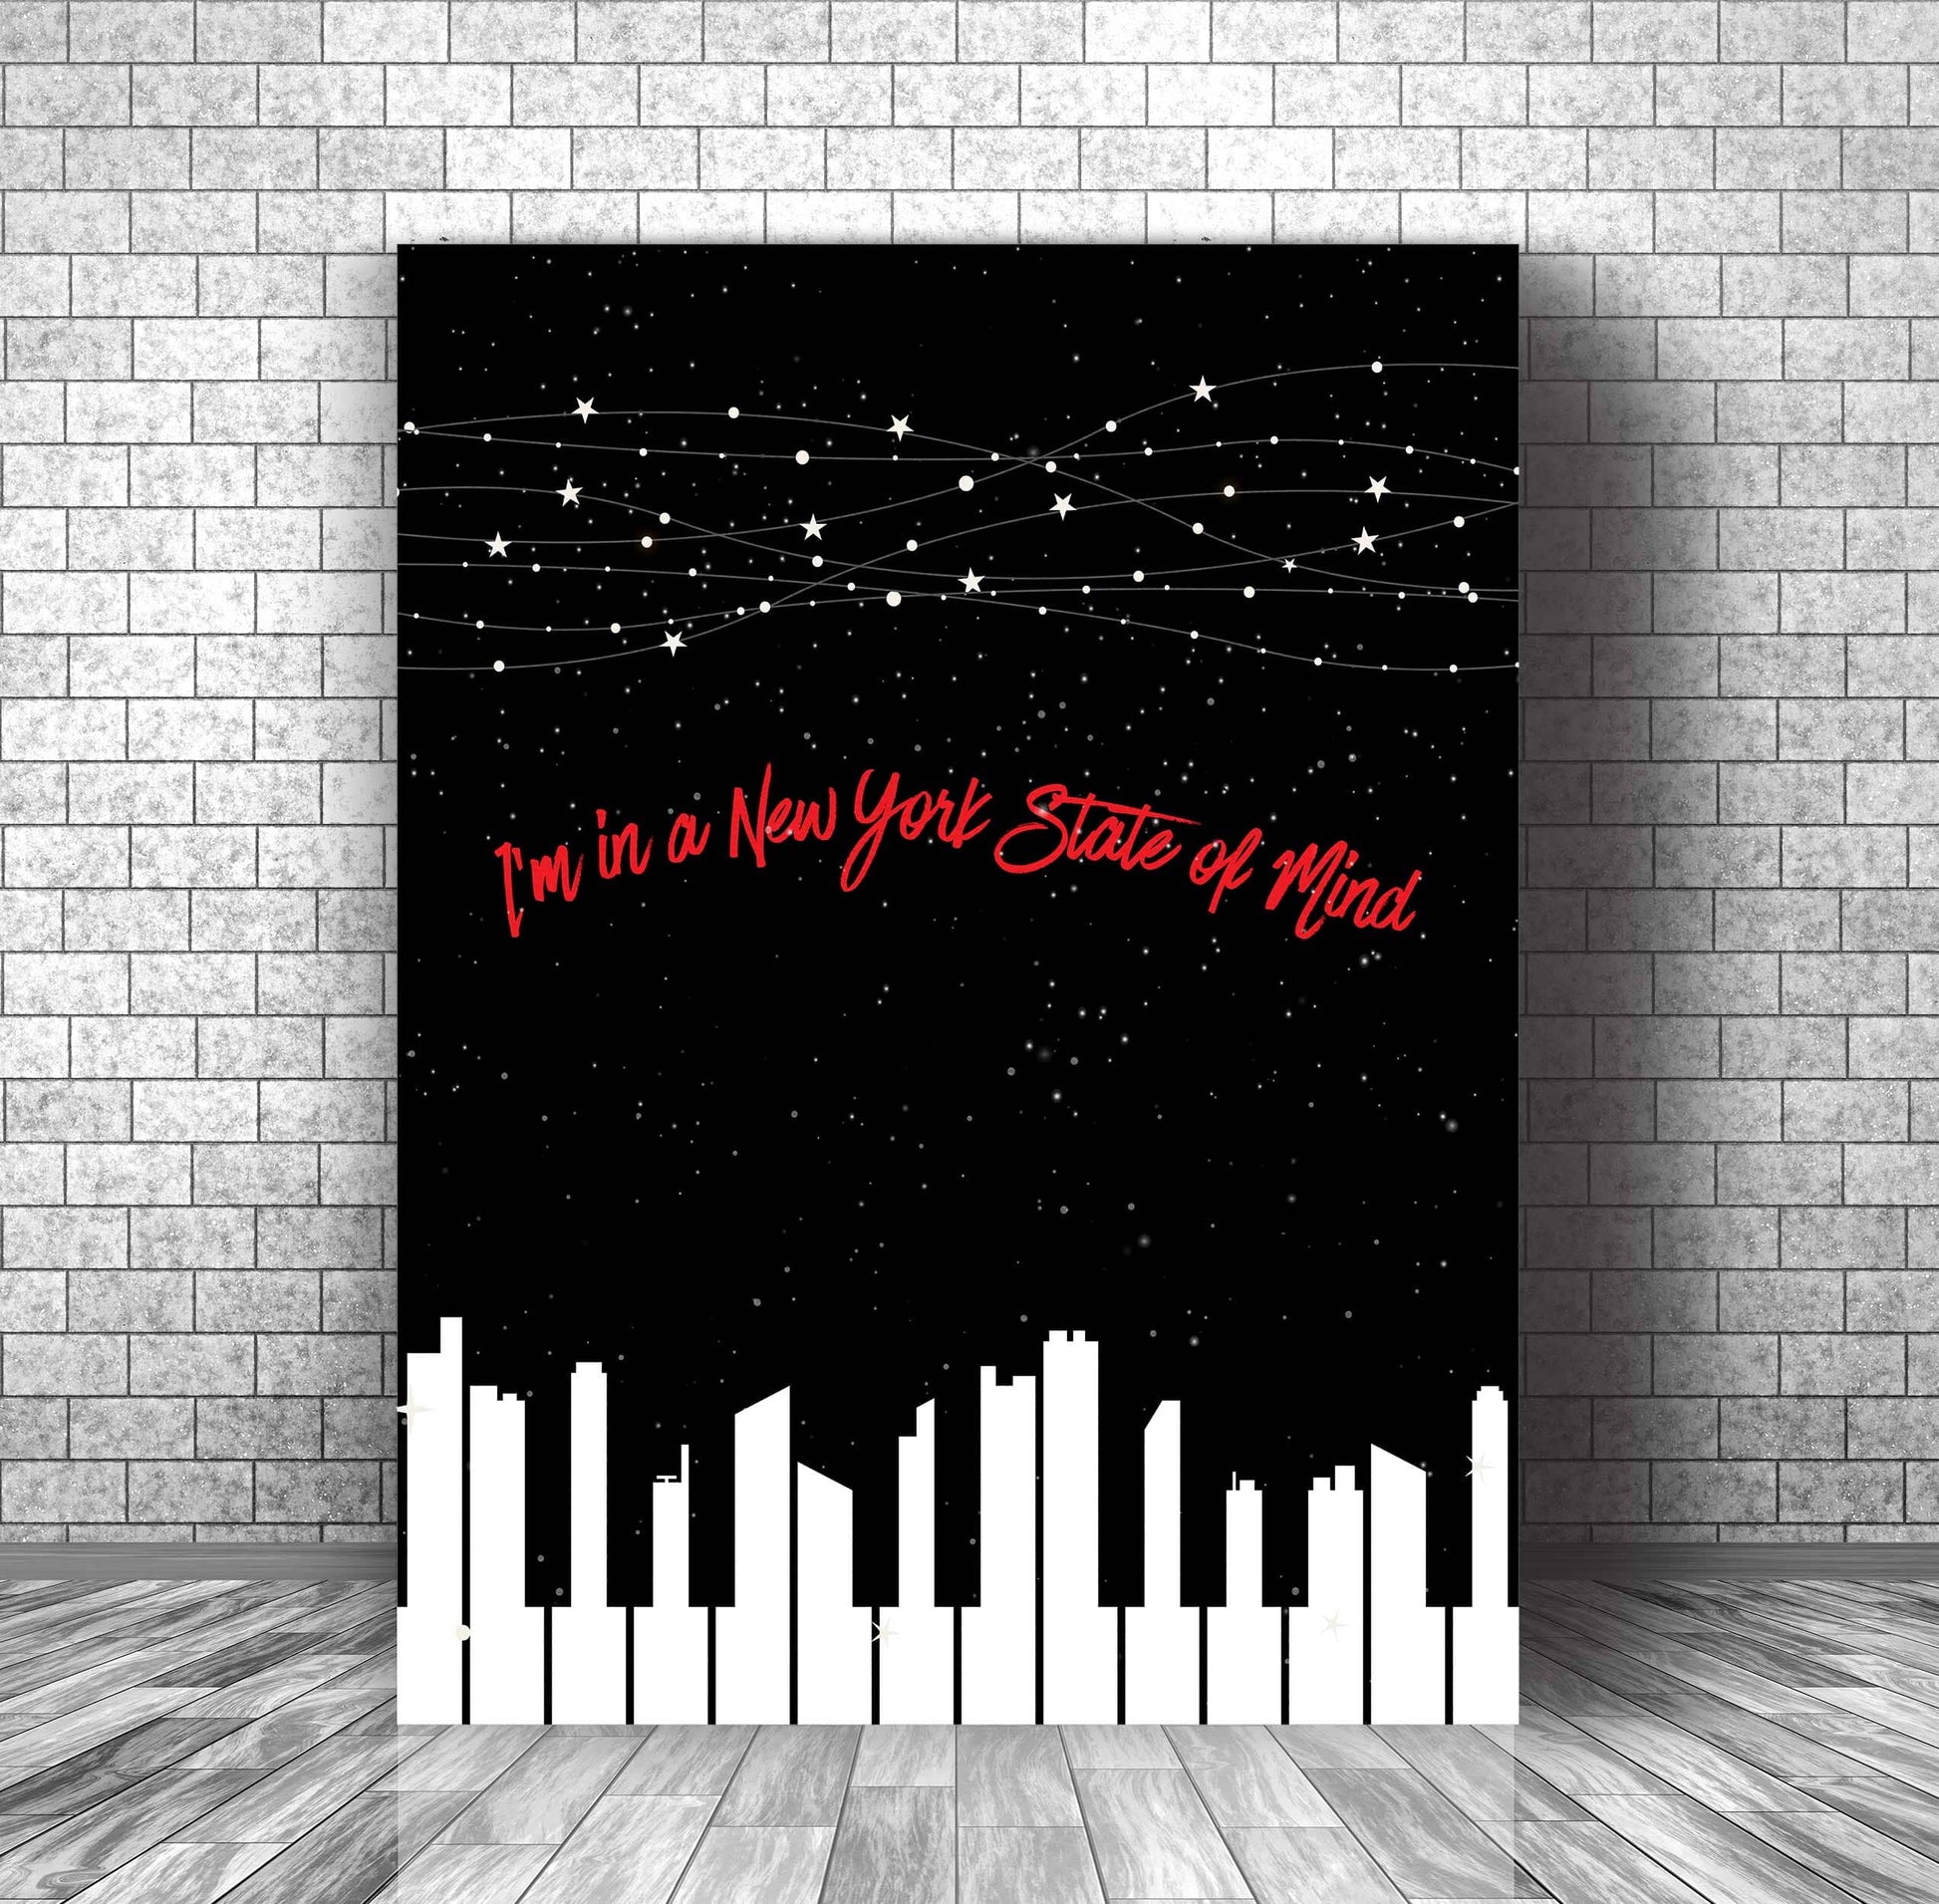 New York State of Mind by Billy Joel - Song Lyrics Art Print Song Lyrics Art Song Lyrics Art 11x14 Canvas Wrap 